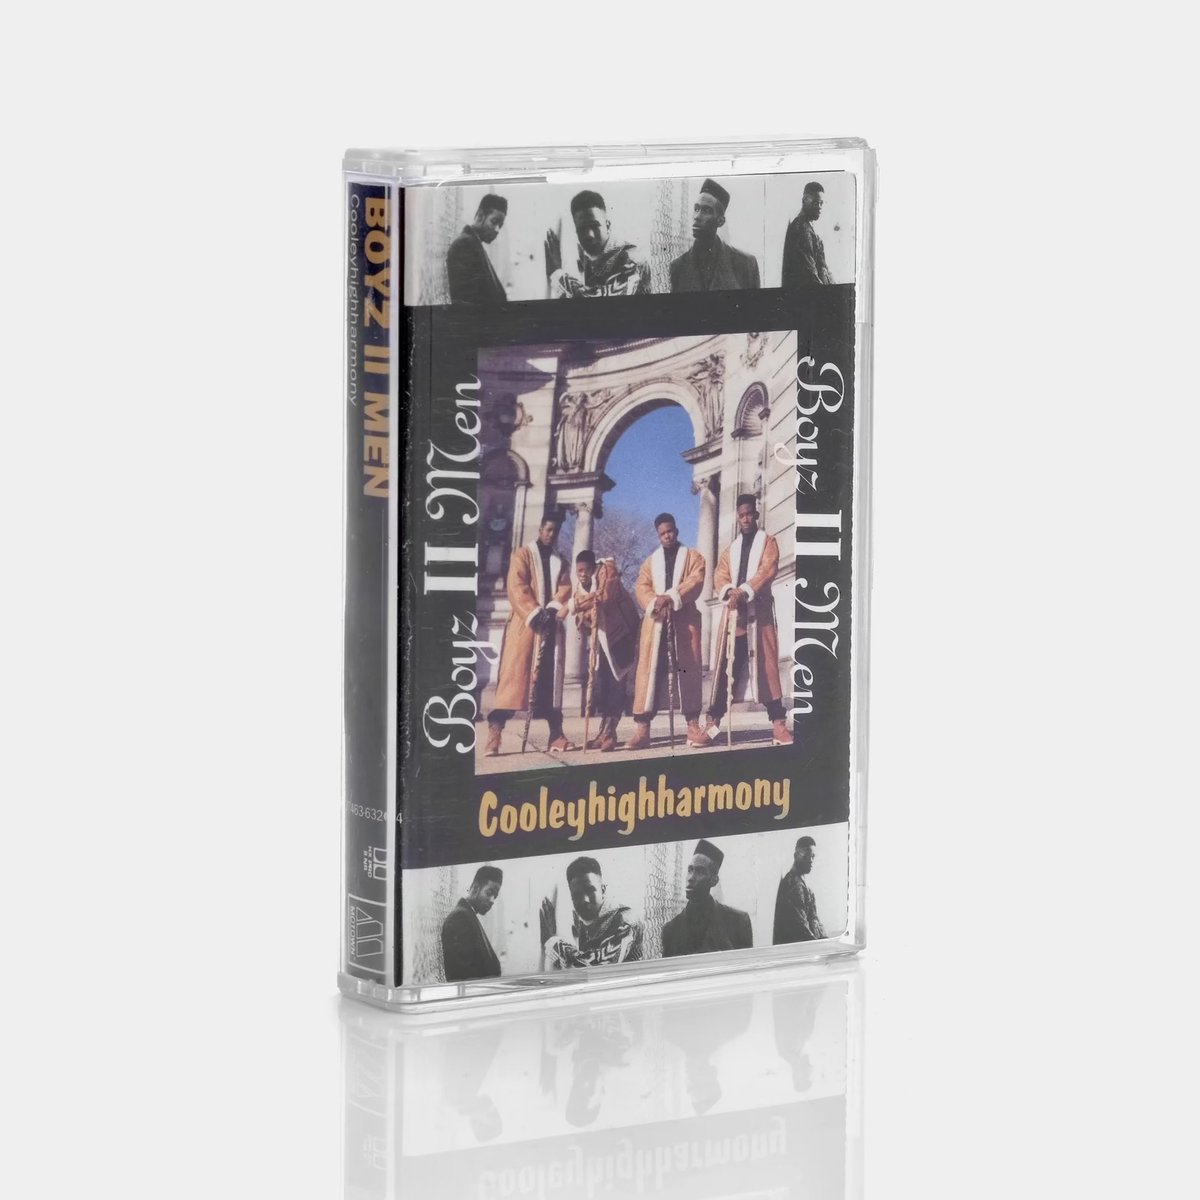 33 years today, you got your first Boyz II Men cassette 🤣🤣

Happy Anniversary to our debut studio album, #CooleyHighHarmony! Celebrate with us at the #linkinbio! #BoyzIIMen #anniversary #debut #album #rnb #90smusic #90skid #endoftheroad #motownphilly